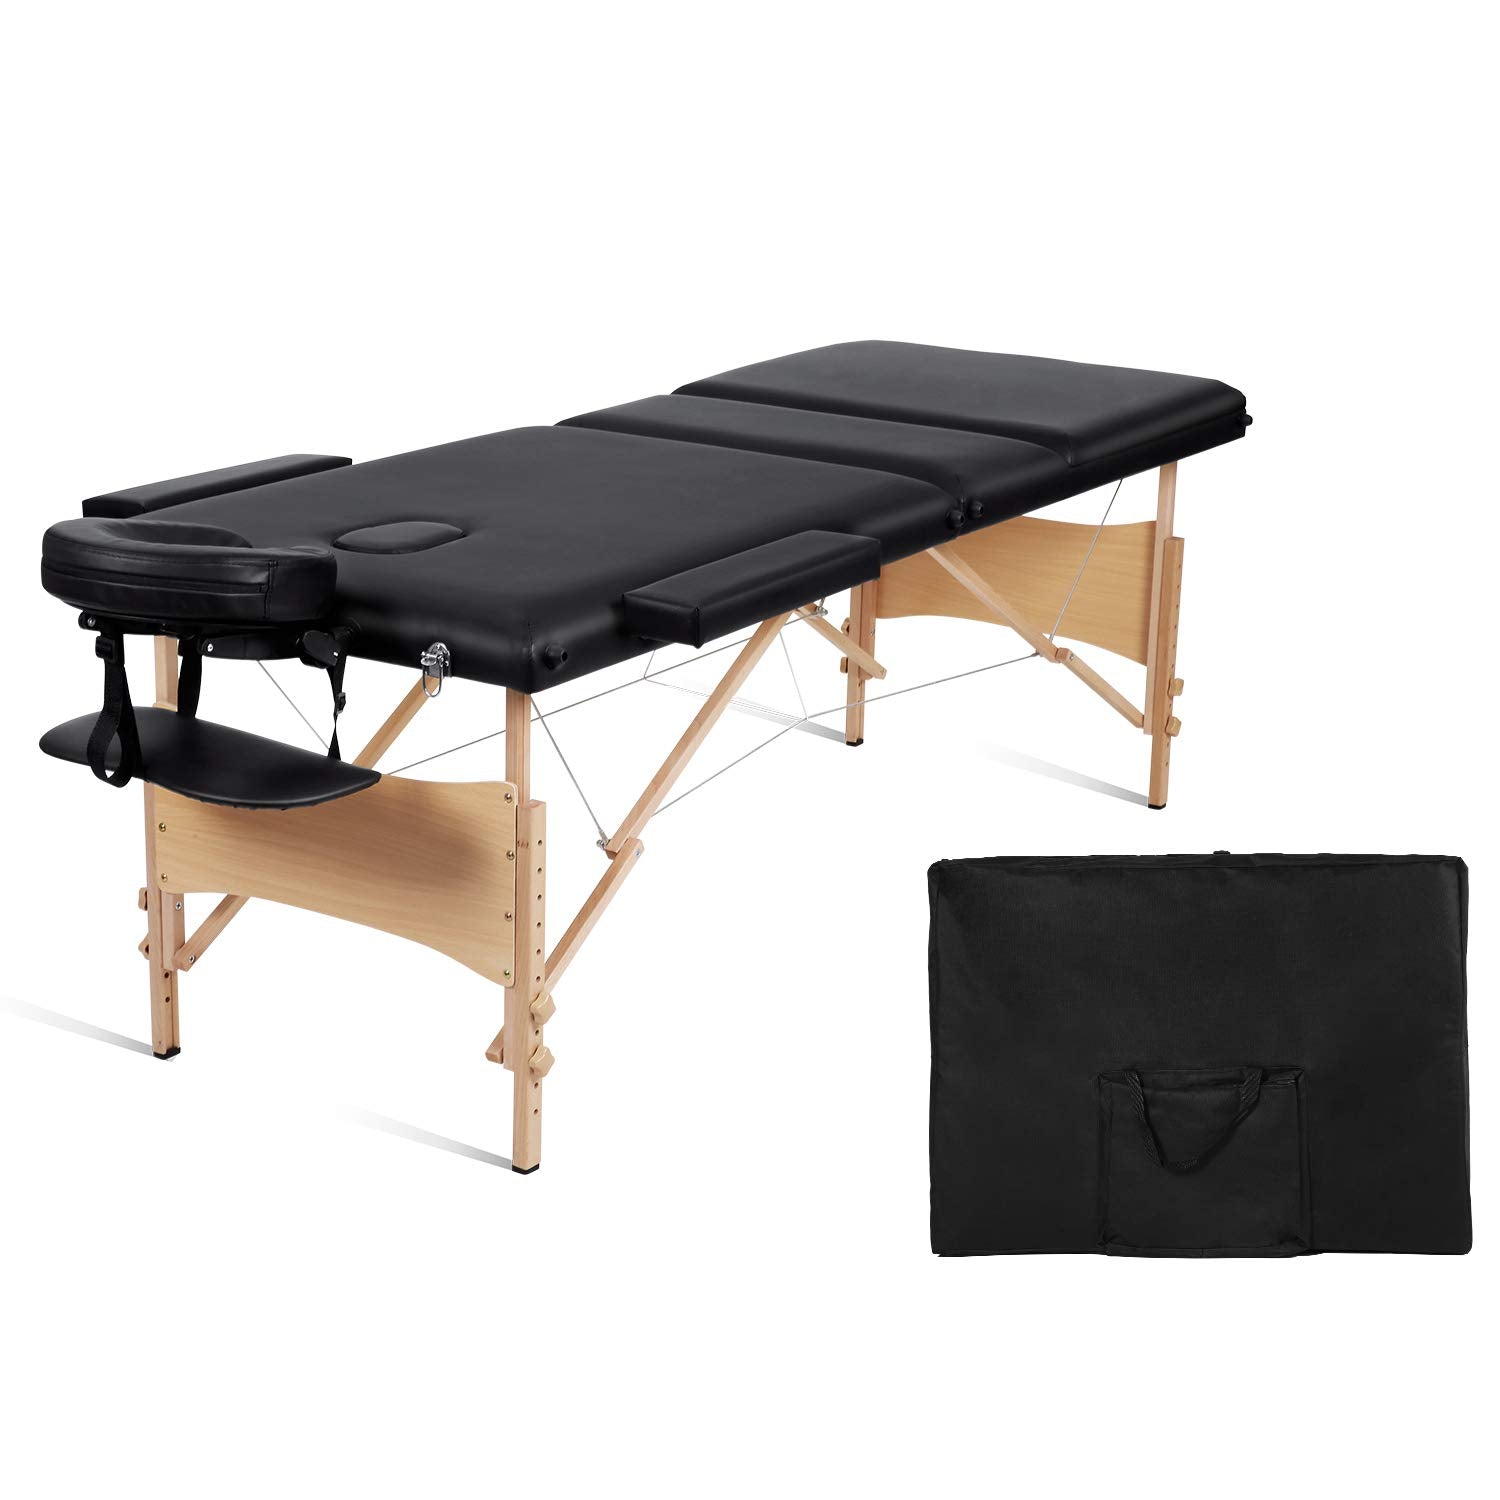 Load image into Gallery viewer, Massage Table Massage Bed Lash Bed Professional Portable Facial Bed SPA Bed Treatment Table 3 Fold Height Adjustable with Carrying Bag(Black)
